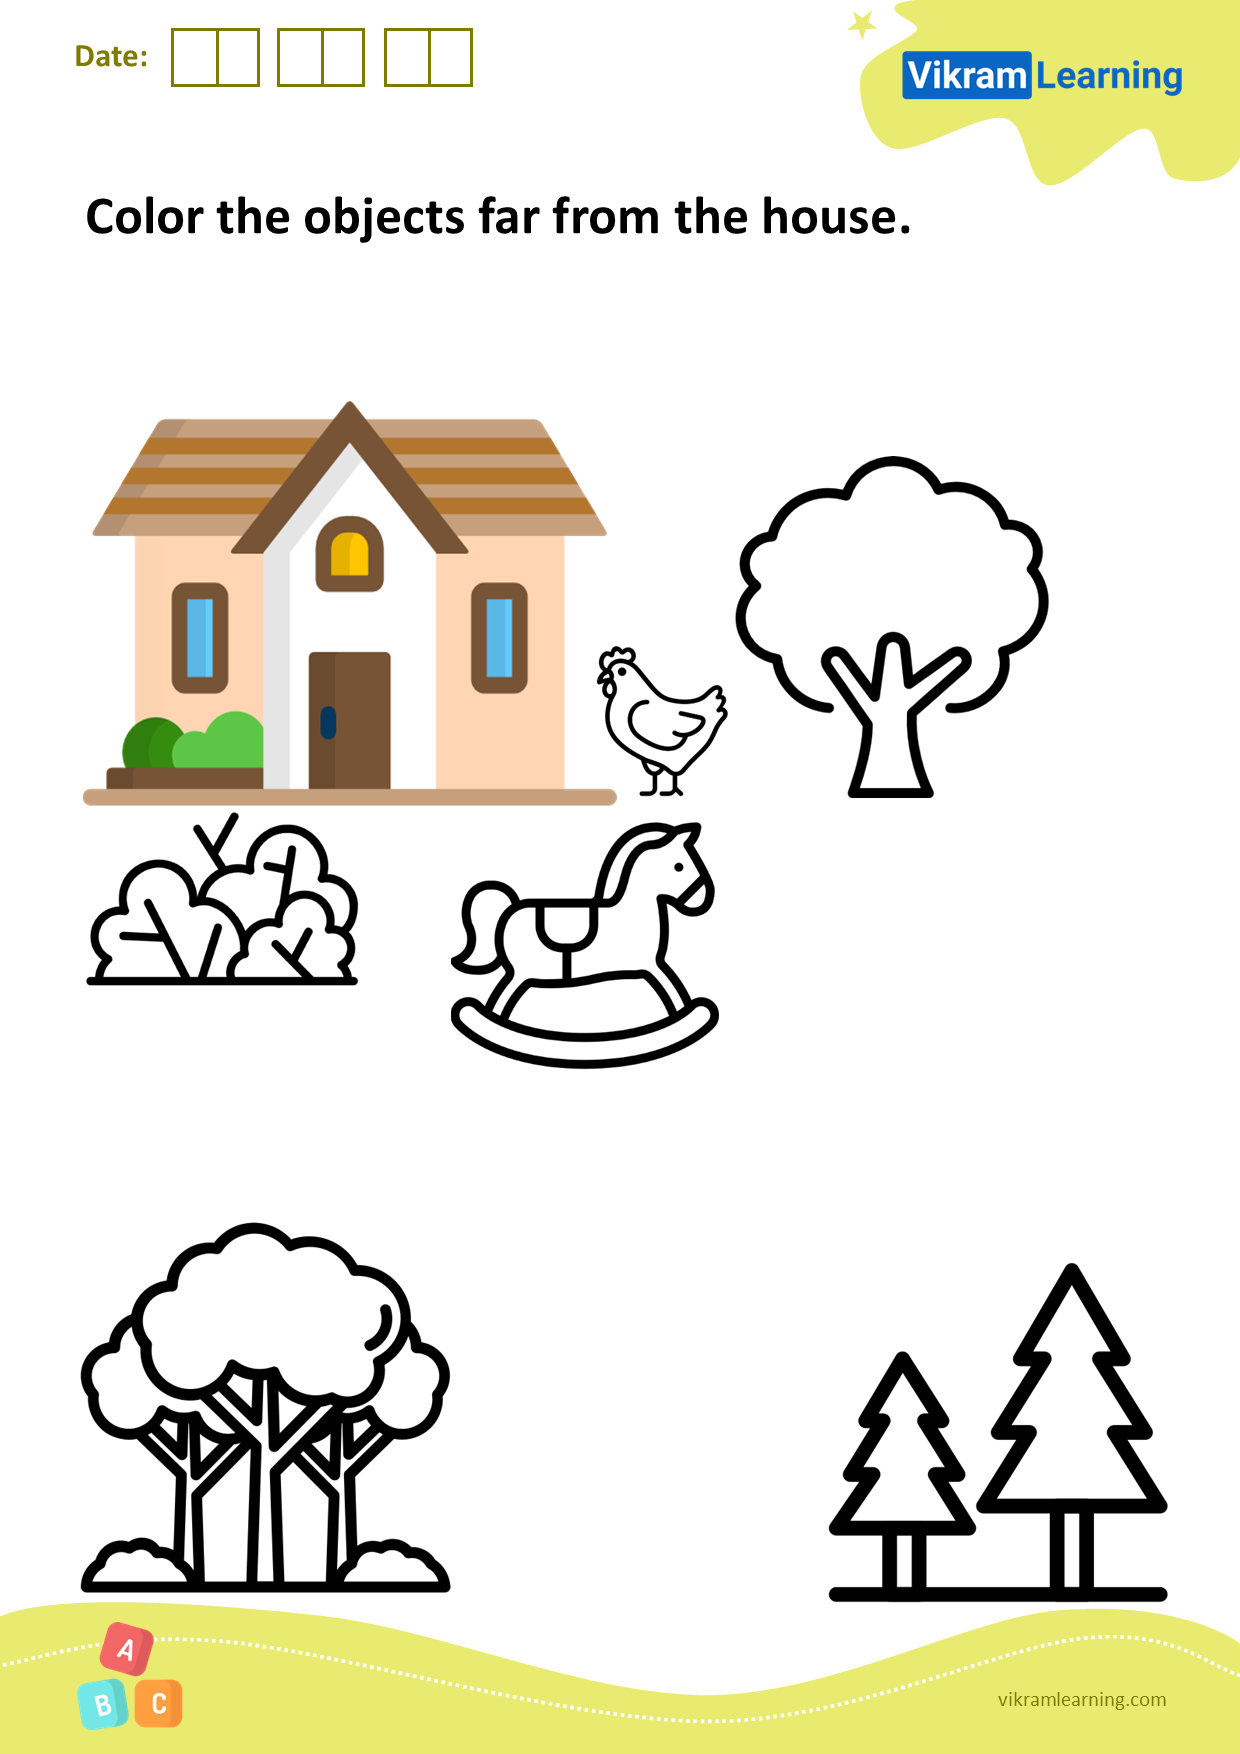 Download color the objects far from the house worksheets